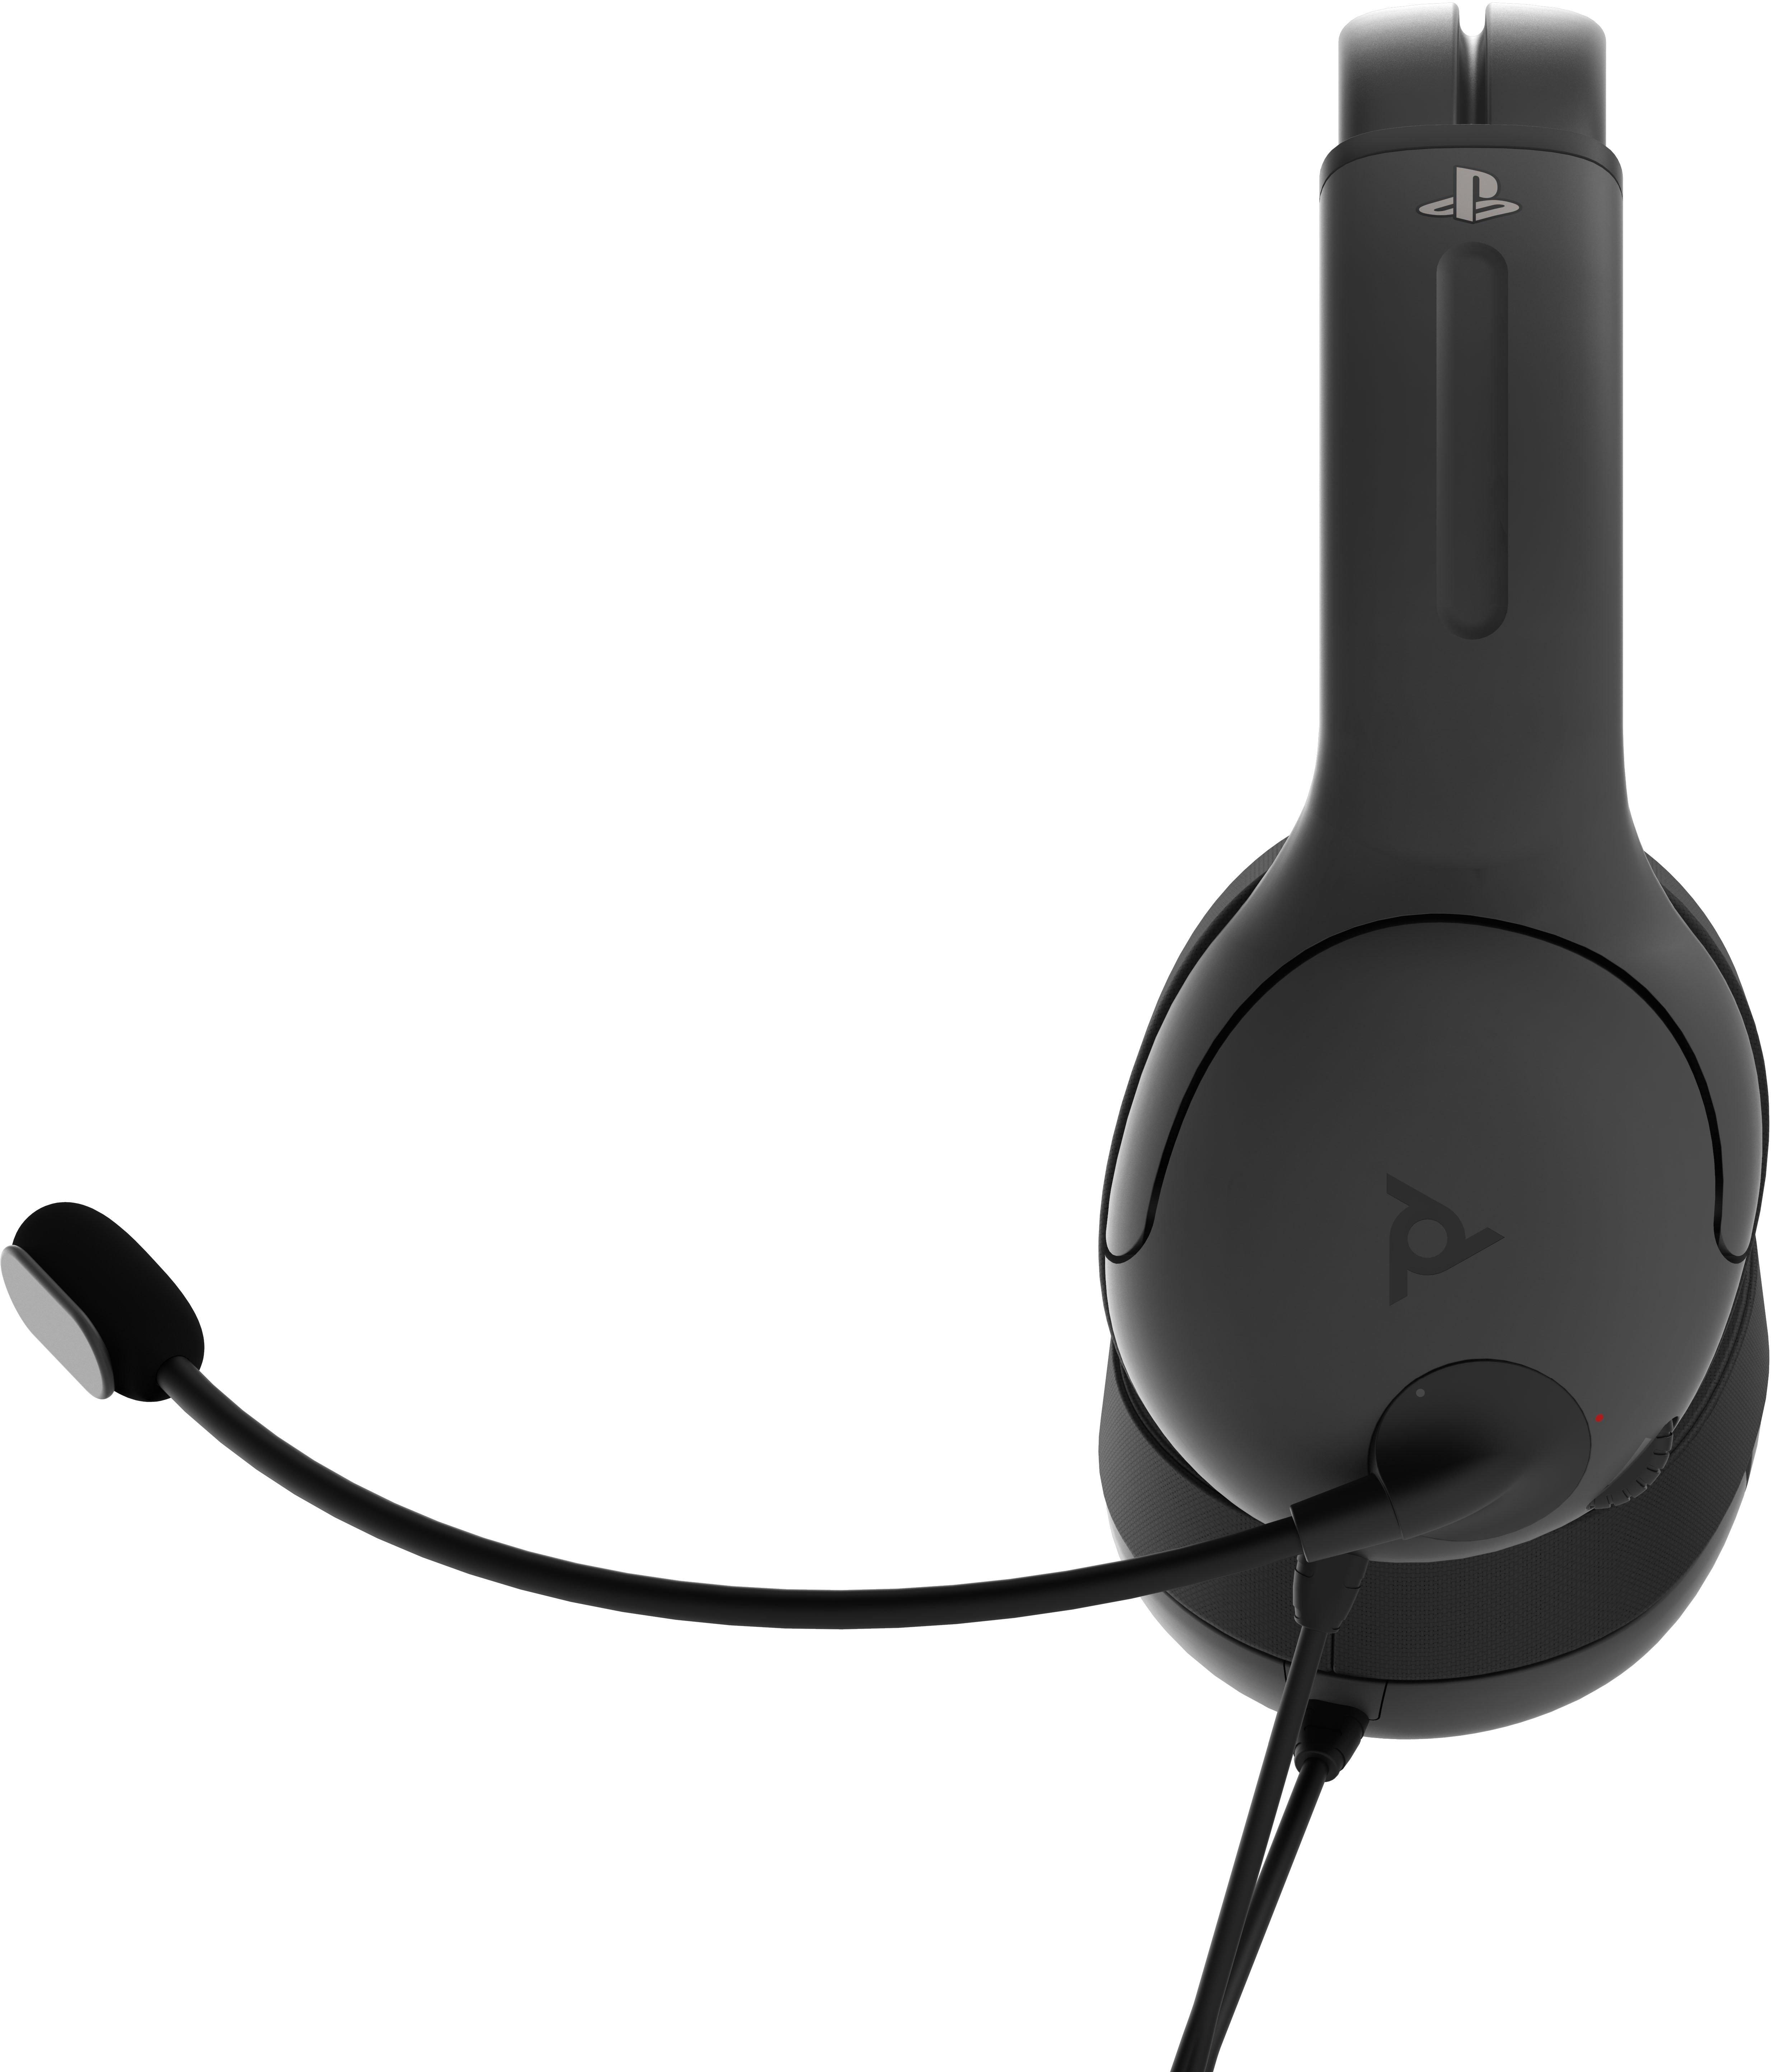 lvl40 wired stereo headset ps4